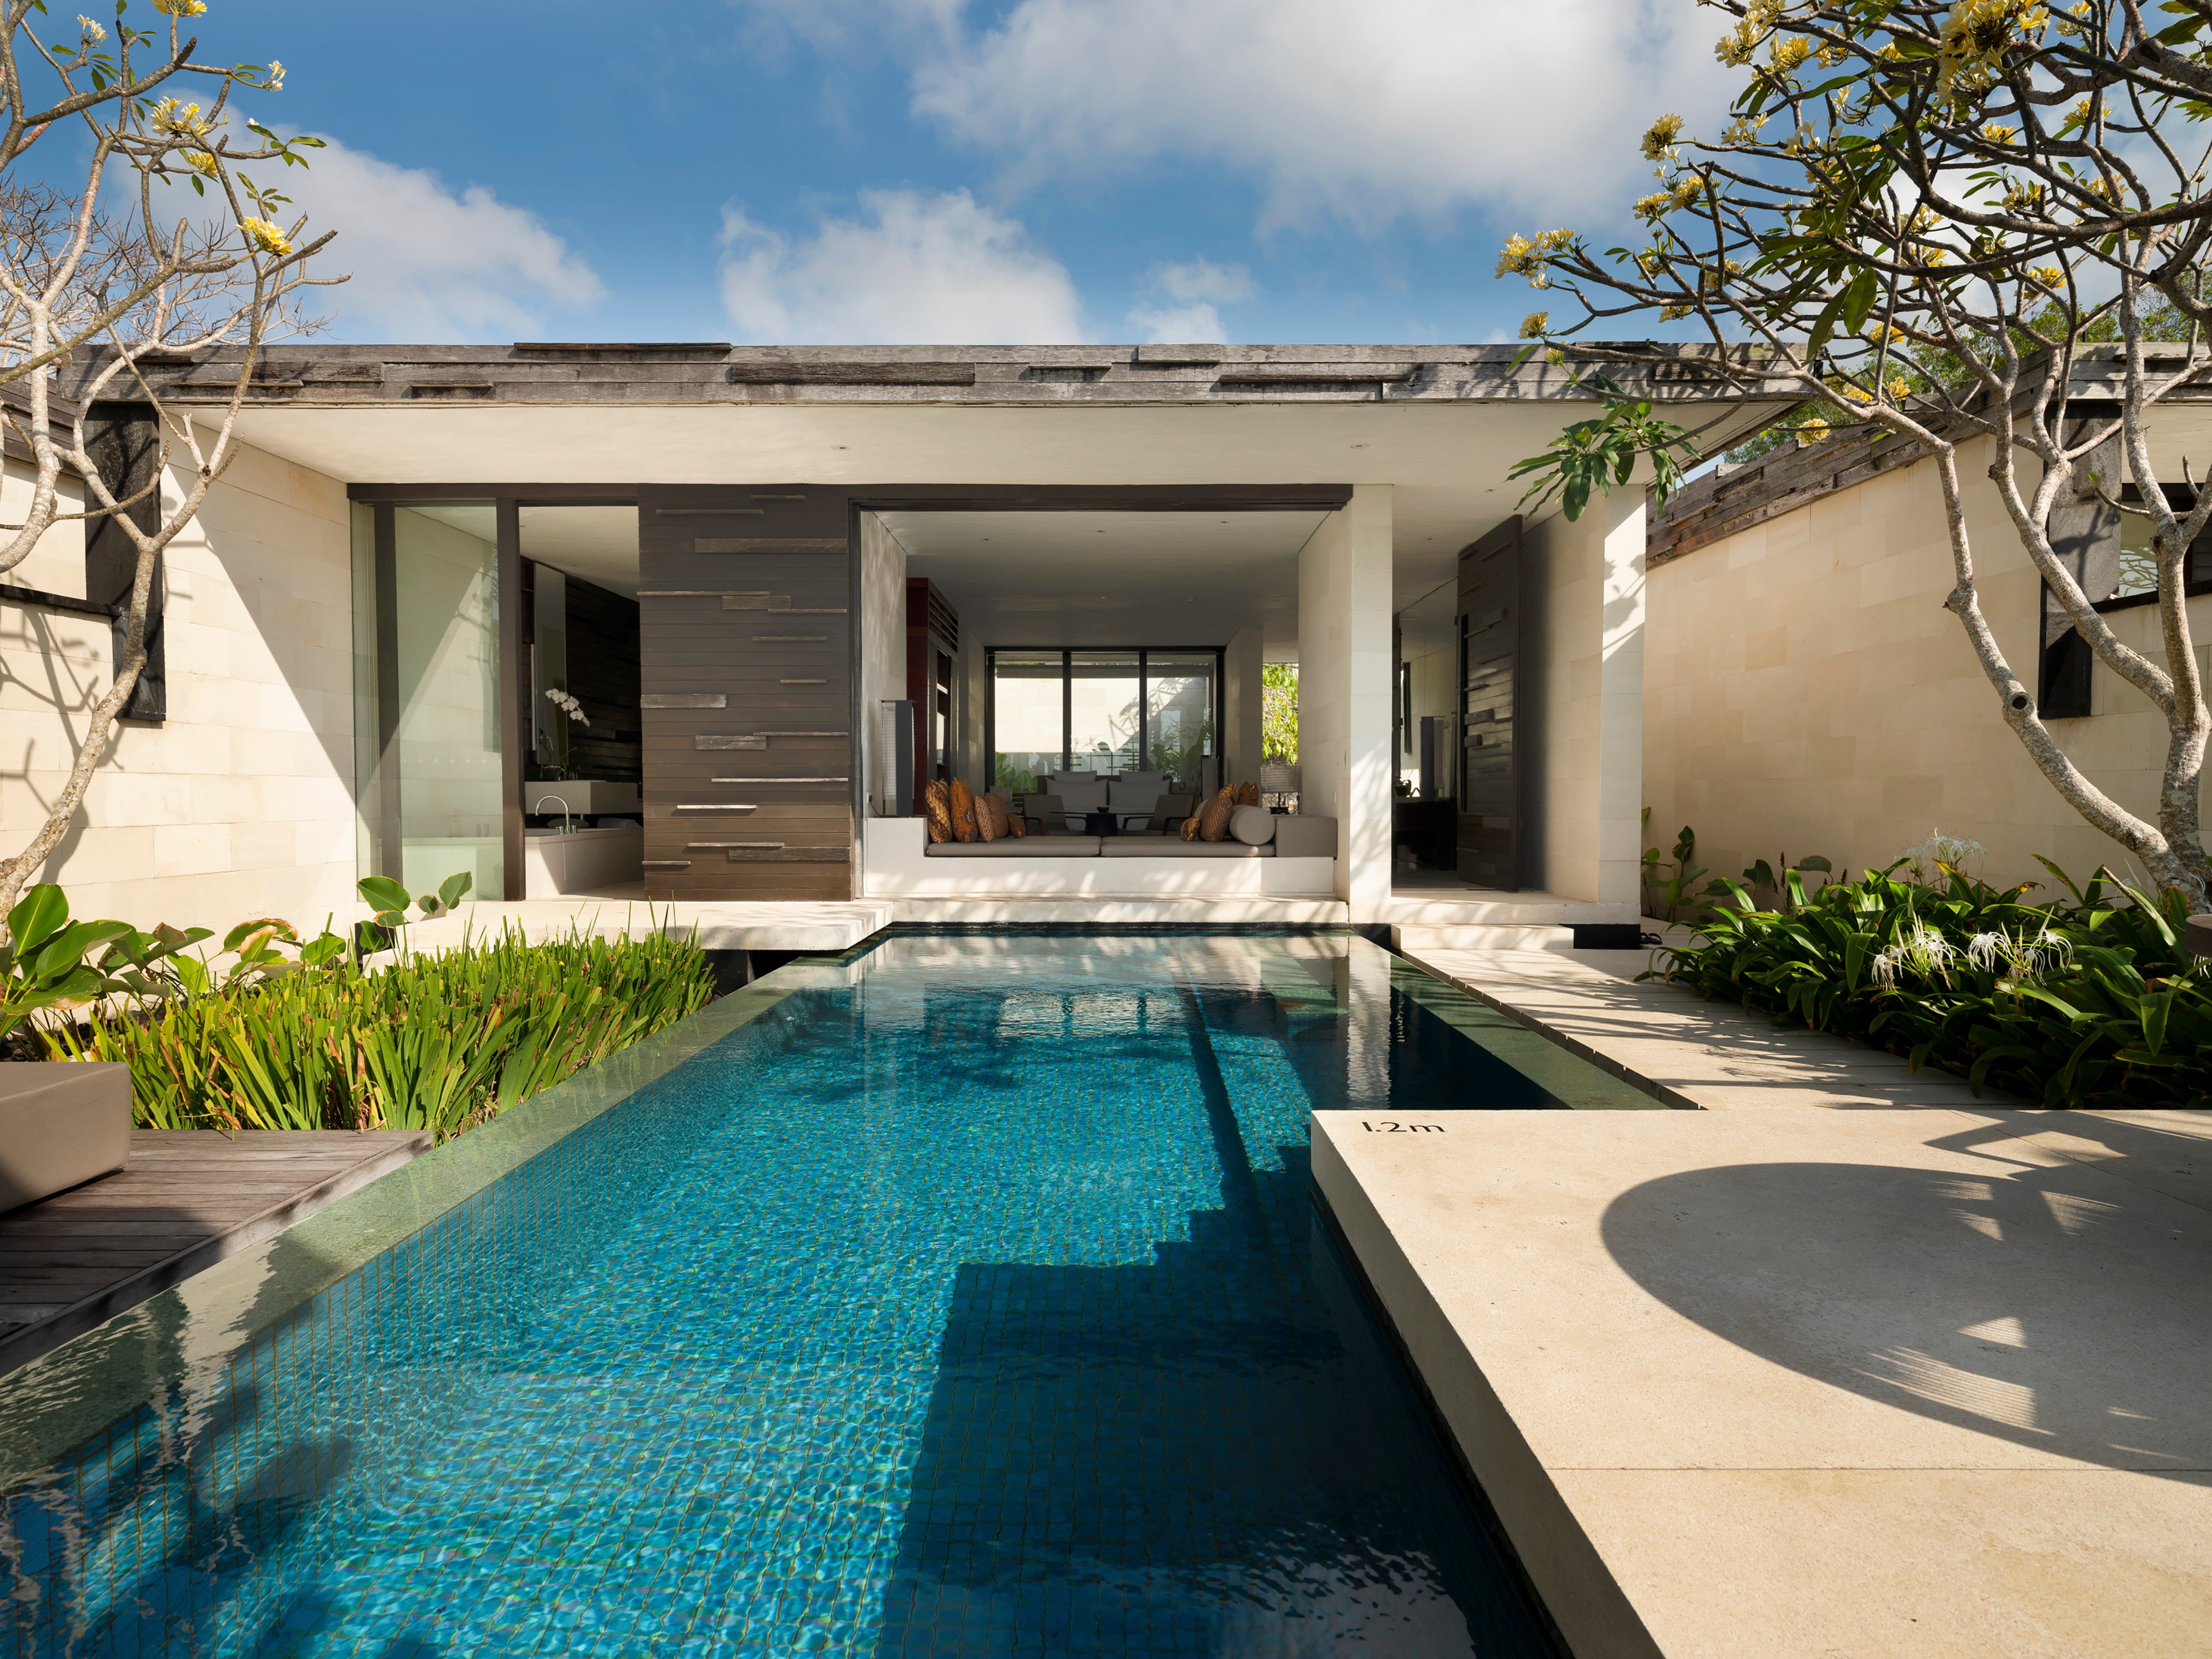 Book a bedroom pool villa and jump straight out of bed and into the water